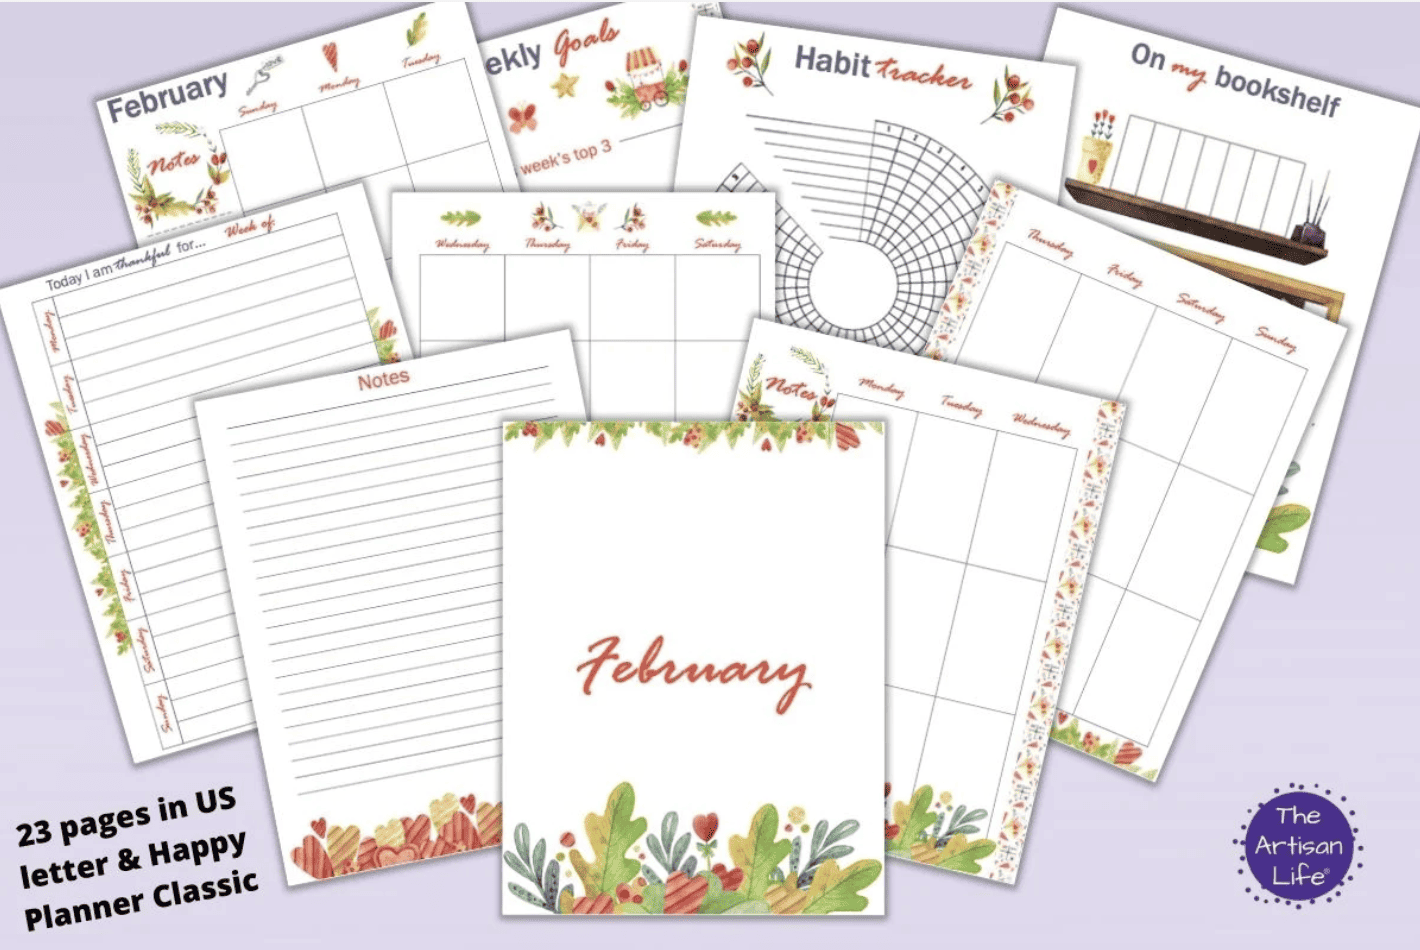 A preview of 10 pages of February planner printable